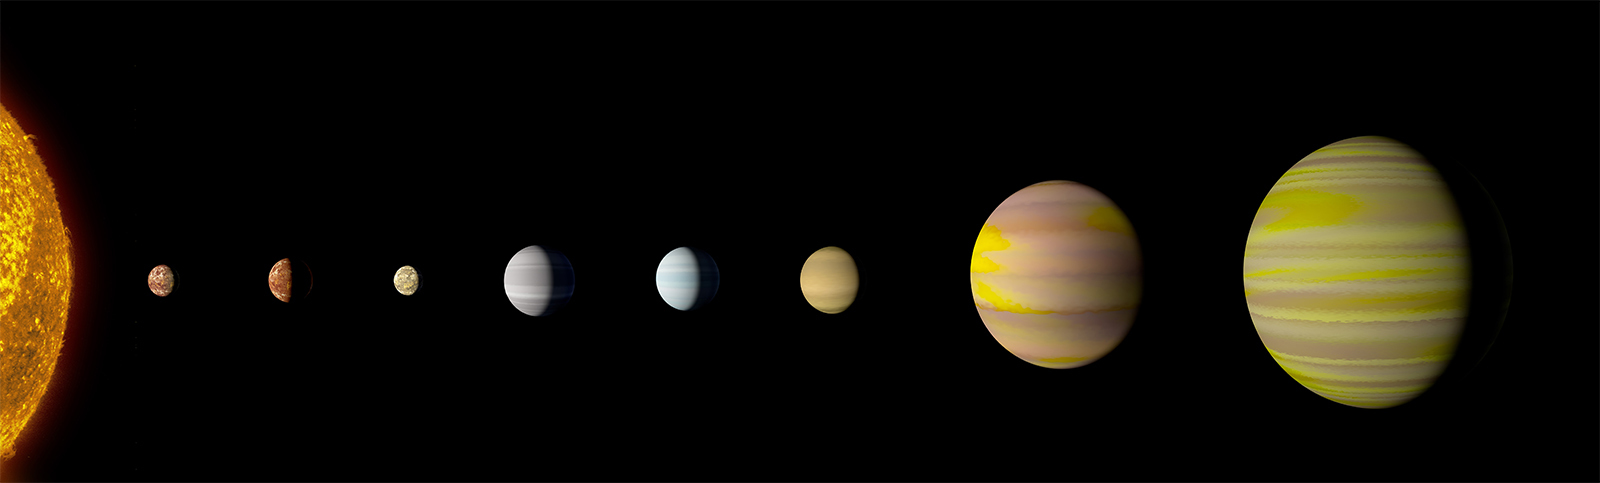 Illustration of eight planets orbiting their star.